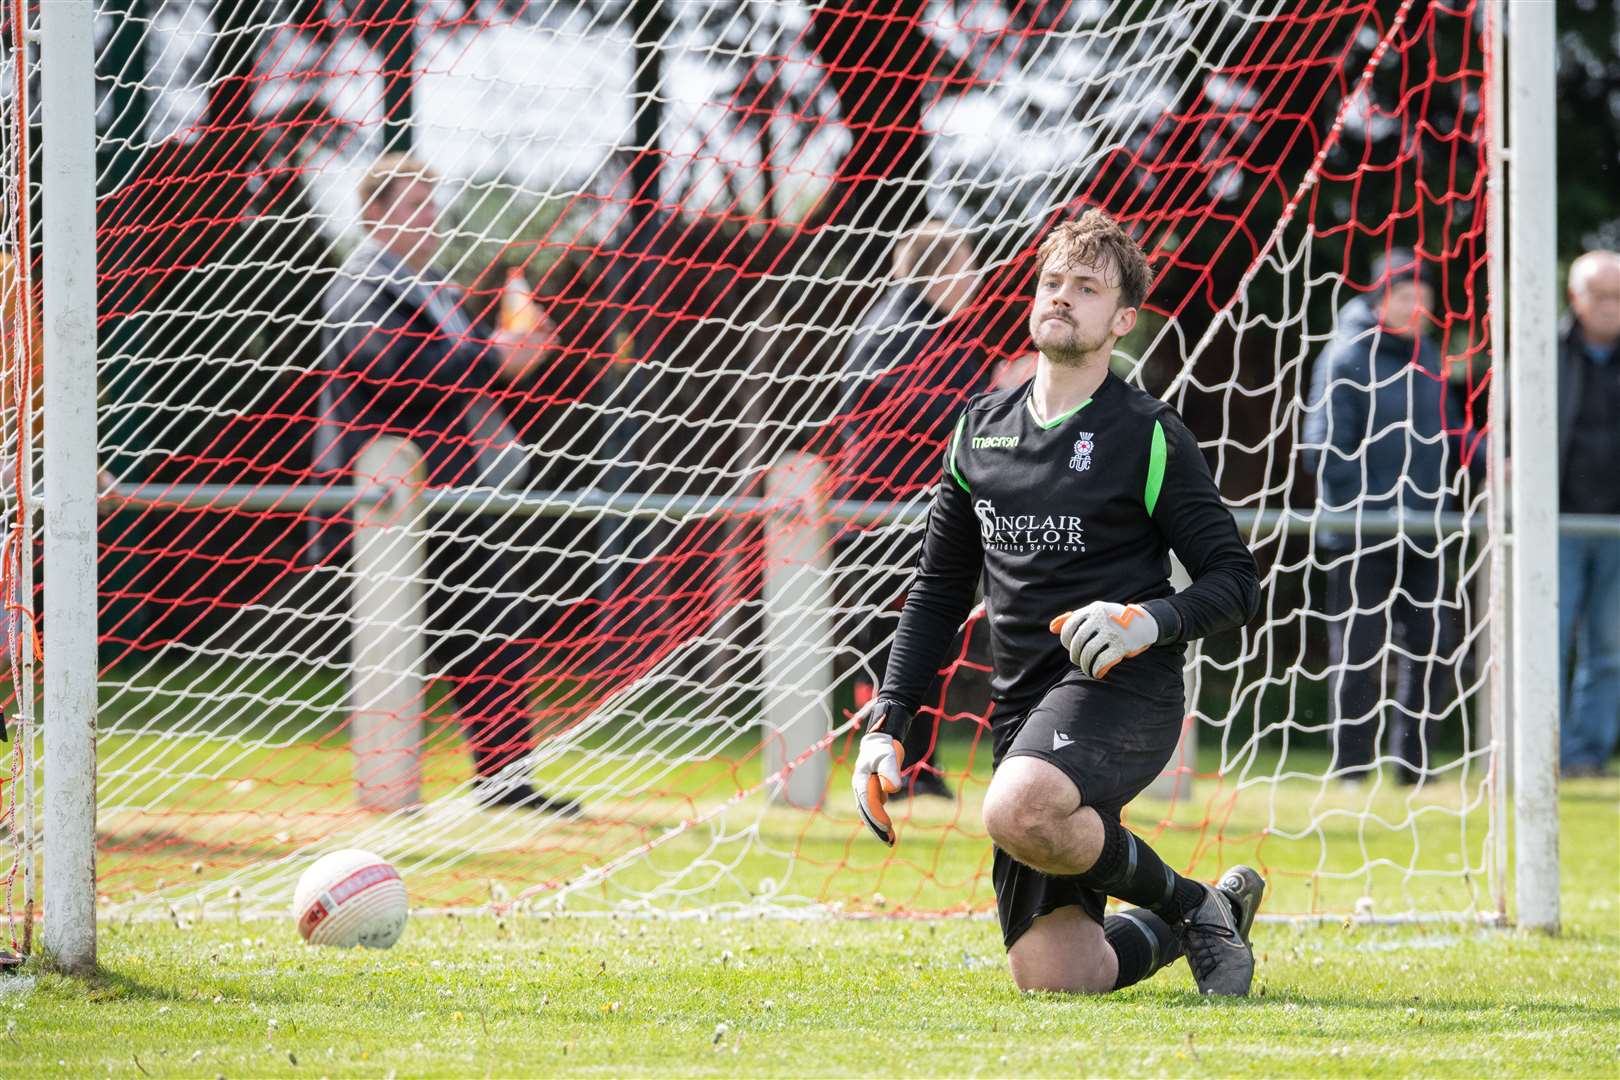 Forres goalkeeper Daniel McLeod is left gutted after the penalty shootout. Dufftown FC (2) vs Forres Thistle FC (2) - Dufftown FC win 5-3 on penalties - Elginshire Cup Final held at Logie Park, Forres 14/05/2022...Picture: Daniel Forsyth..